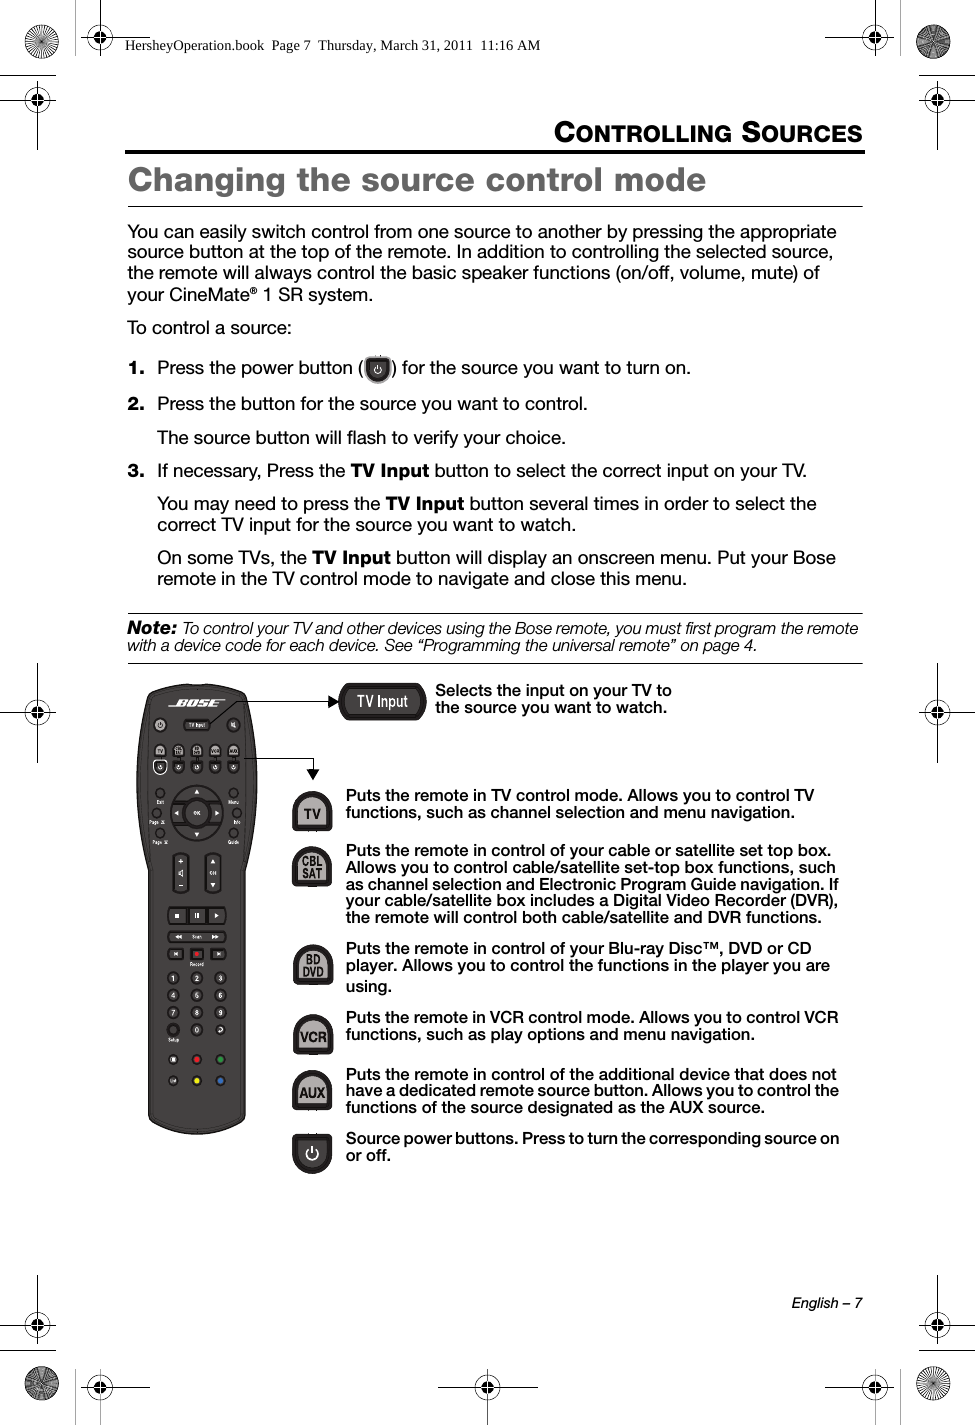 English – 7CONTROLLING SOURCESChanging the source control modeYou can easily switch control from one source to another by pressing the appropriate source button at the top of the remote. In addition to controlling the selected source,the remote will always control the basic speaker functions (on/off, volume, mute) of your CineMate® 1 SR system.To control a source:1. Press the power button ( ) for the source you want to turn on.2. Press the button for the source you want to control.The source button will flash to verify your choice.3. If necessary, Press the TV Input button to select the correct input on your TV.You may need to press the TV Input button several times in order to select the correct TV input for the source you want to watch.On some TVs, the TV Input button will display an onscreen menu. Put your Bose remote in the TV control mode to navigate and close this menu.Note: To control your TV and other devices using the Bose remote, you must first program the remote with a device code for each device. See “Programming the universal remote” on page 4.Puts the remote in TV control mode. Allows you to control TV functions, such as channel selection and menu navigation.Puts the remote in control of your cable or satellite set top box. Allows you to control cable/satellite set-top box functions, such as channel selection and Electronic Program Guide navigation. If your cable/satellite box includes a Digital Video Recorder (DVR), the remote will control both cable/satellite and DVR functions.Puts the remote in control of your Blu-ray Disc™, DVD or CD player. Allows you to control the functions in the player you areusing.Puts the remote in VCR control mode. Allows you to control VCR functions, such as play options and menu navigation.Puts the remote in control of the additional device that does not have a dedicated remote source button. Allows you to control the functions of the source designated as the AUX source.Source power buttons. Press to turn the corresponding source on or off.Selects the input on your TV to the source you want to watch.HersheyOperation.book  Page 7  Thursday, March 31, 2011  11:16 AM